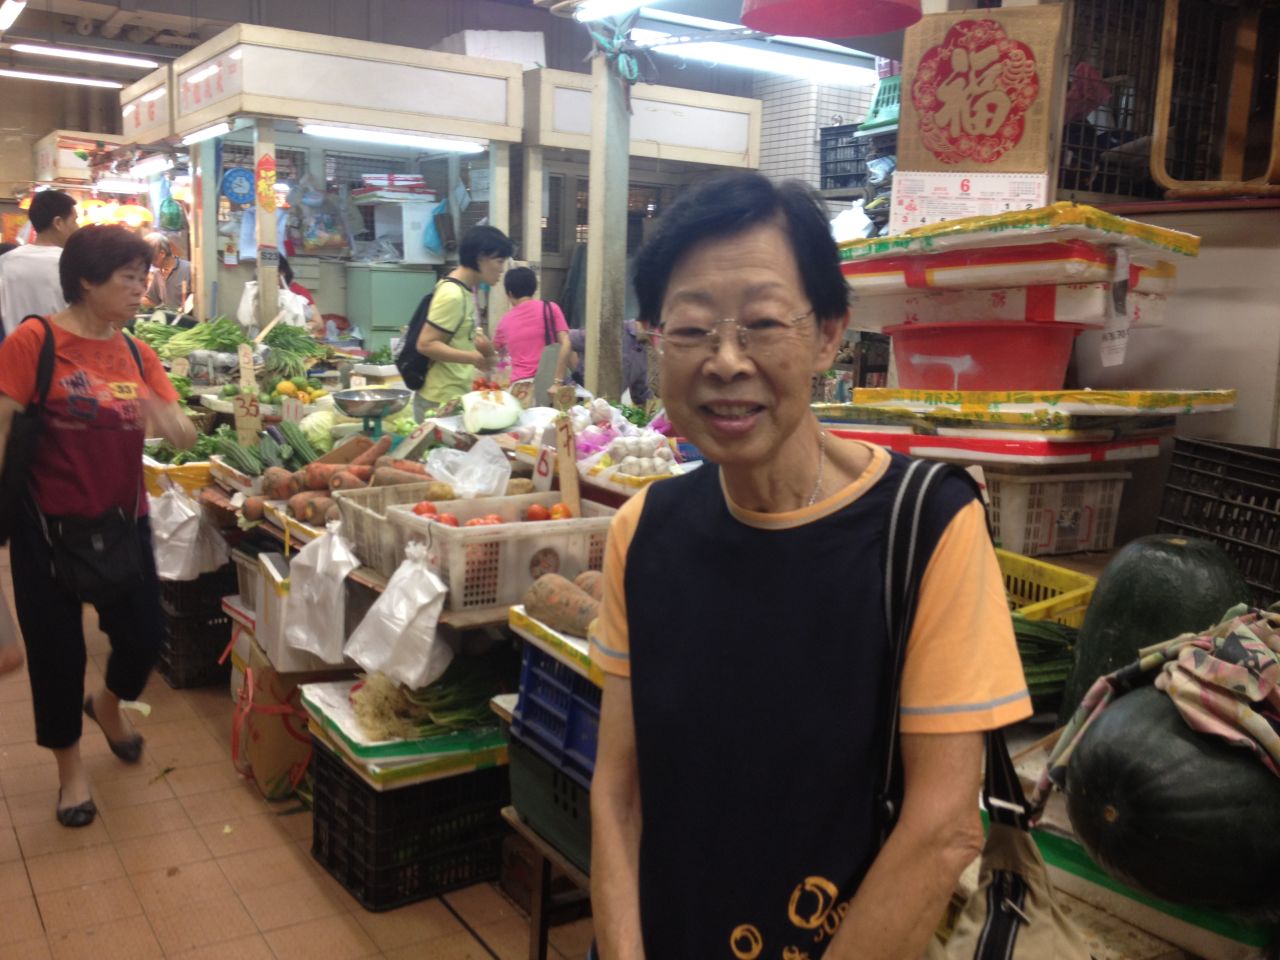 Wong Miu Ping is in her 70s and says Hong Kong needs to spend more money on medical care. She's retired and is living off her savings.